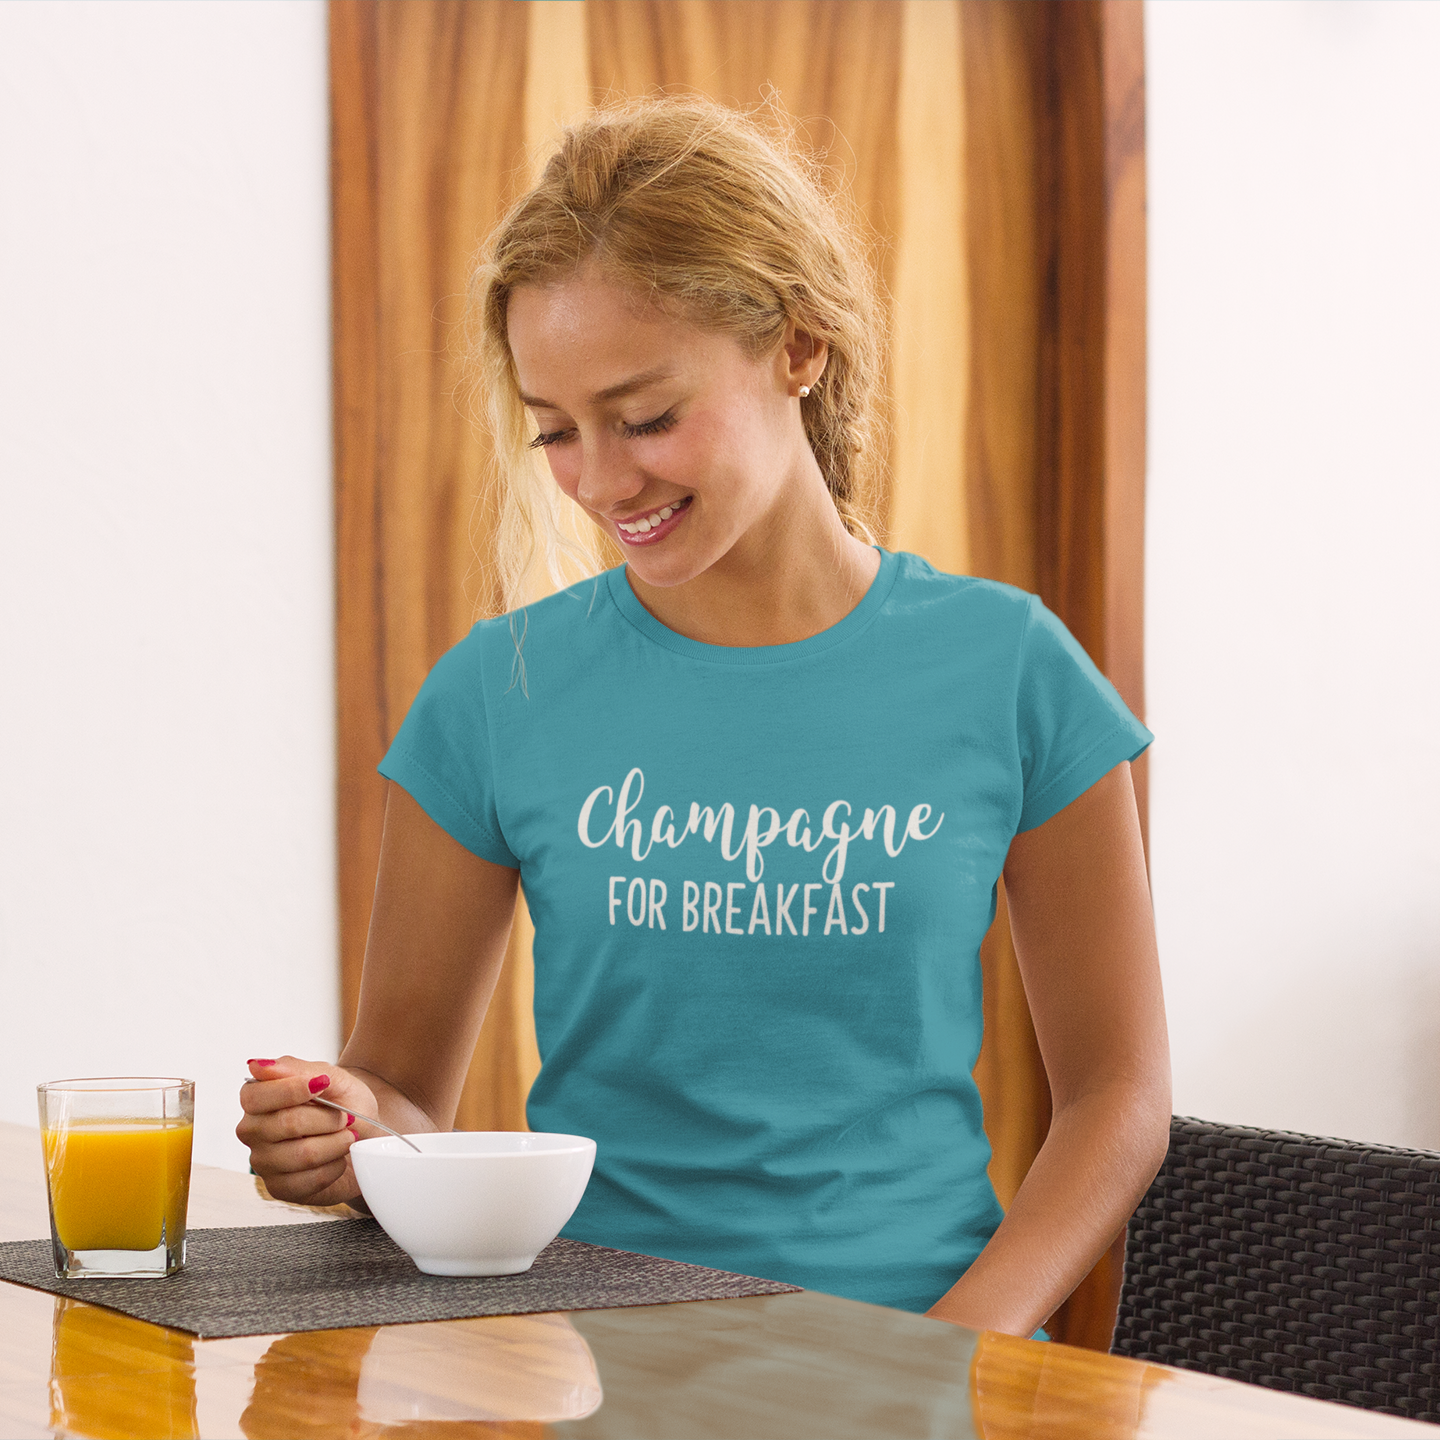 'Champagne for breakfast' adult shirt